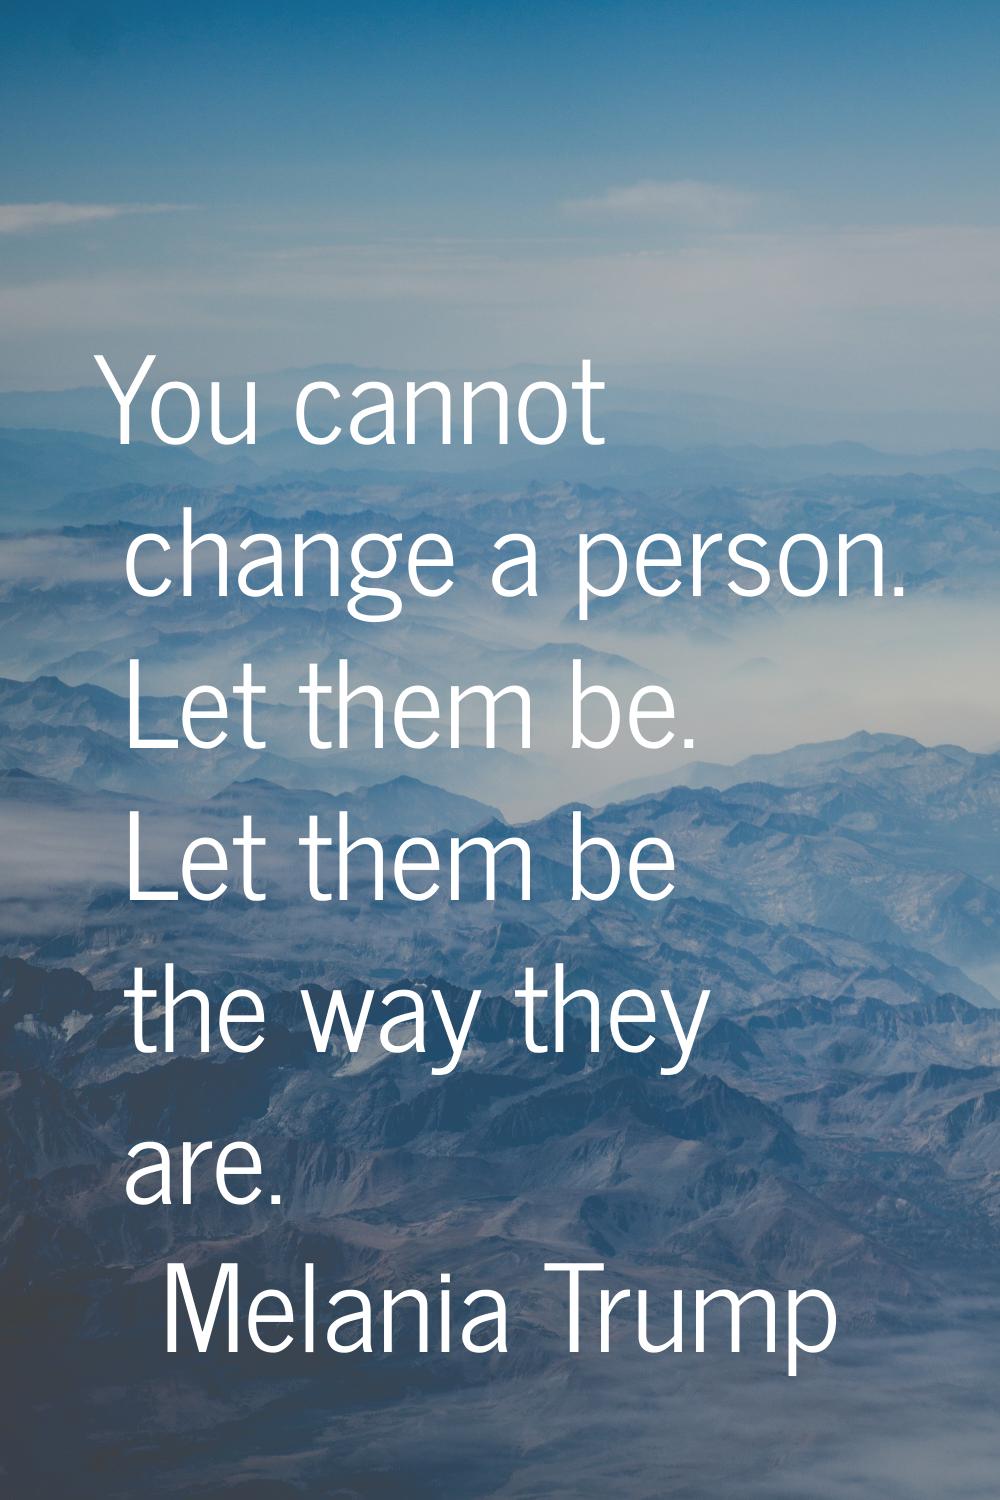 You cannot change a person. Let them be. Let them be the way they are.